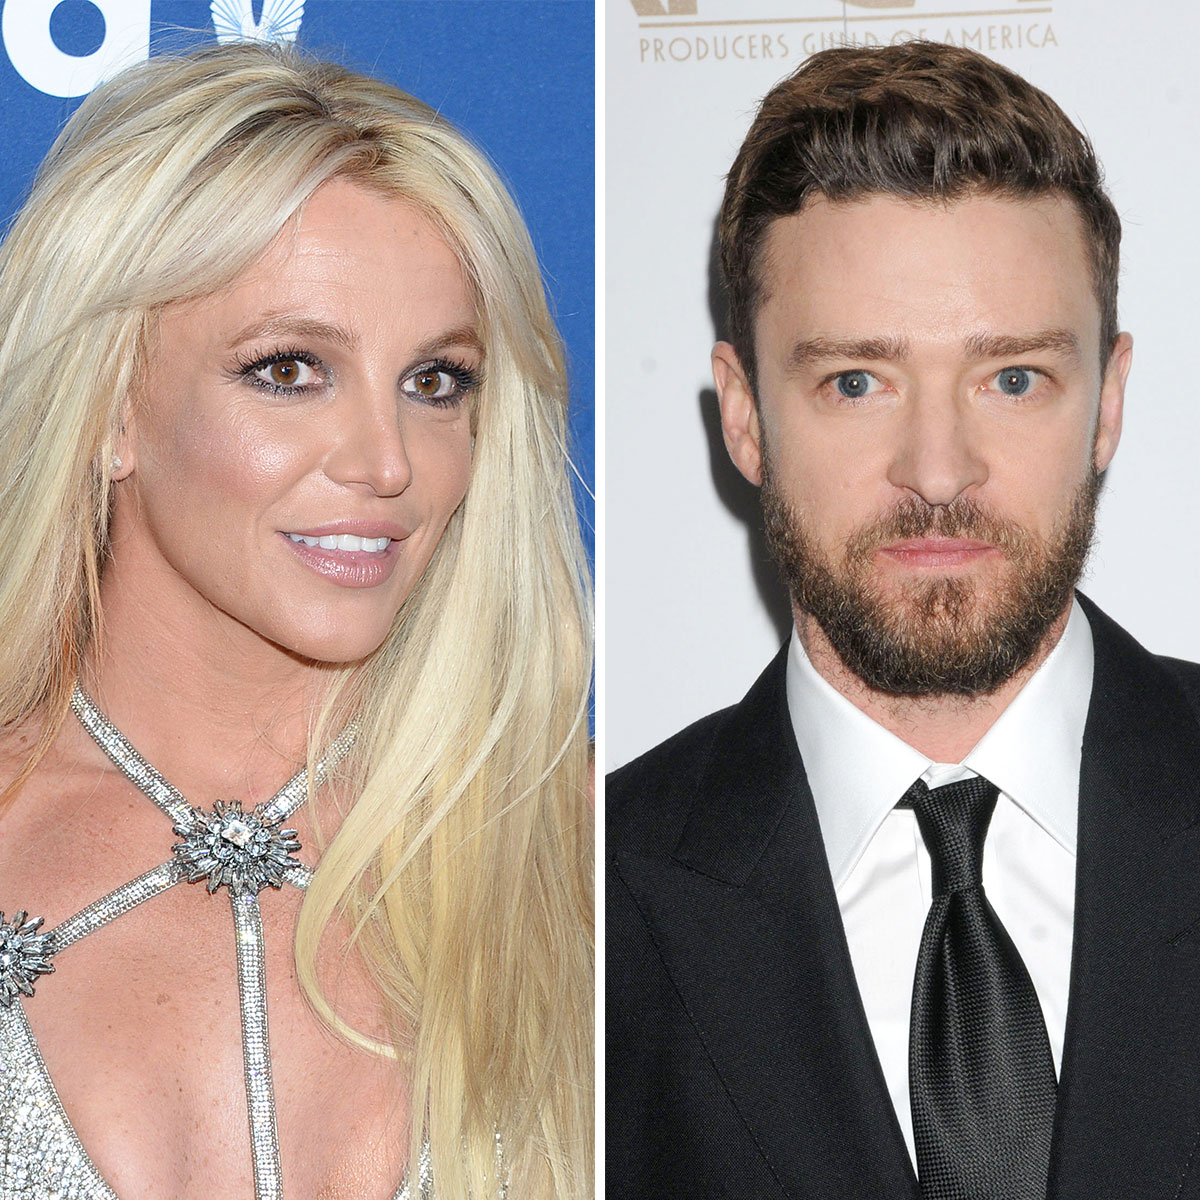 Britney Spears Referenced Ex Justin Timberlake on Instagram Again